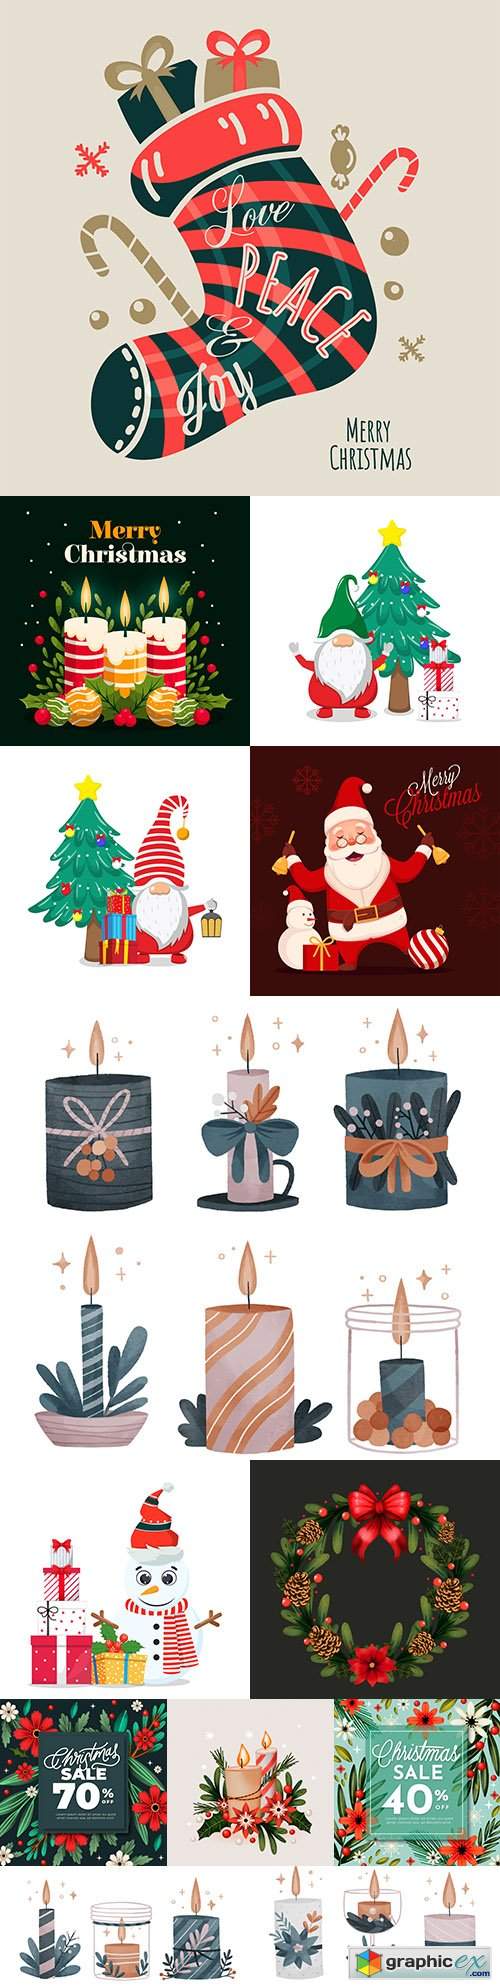  Christmas and New Year background flat illustration design 